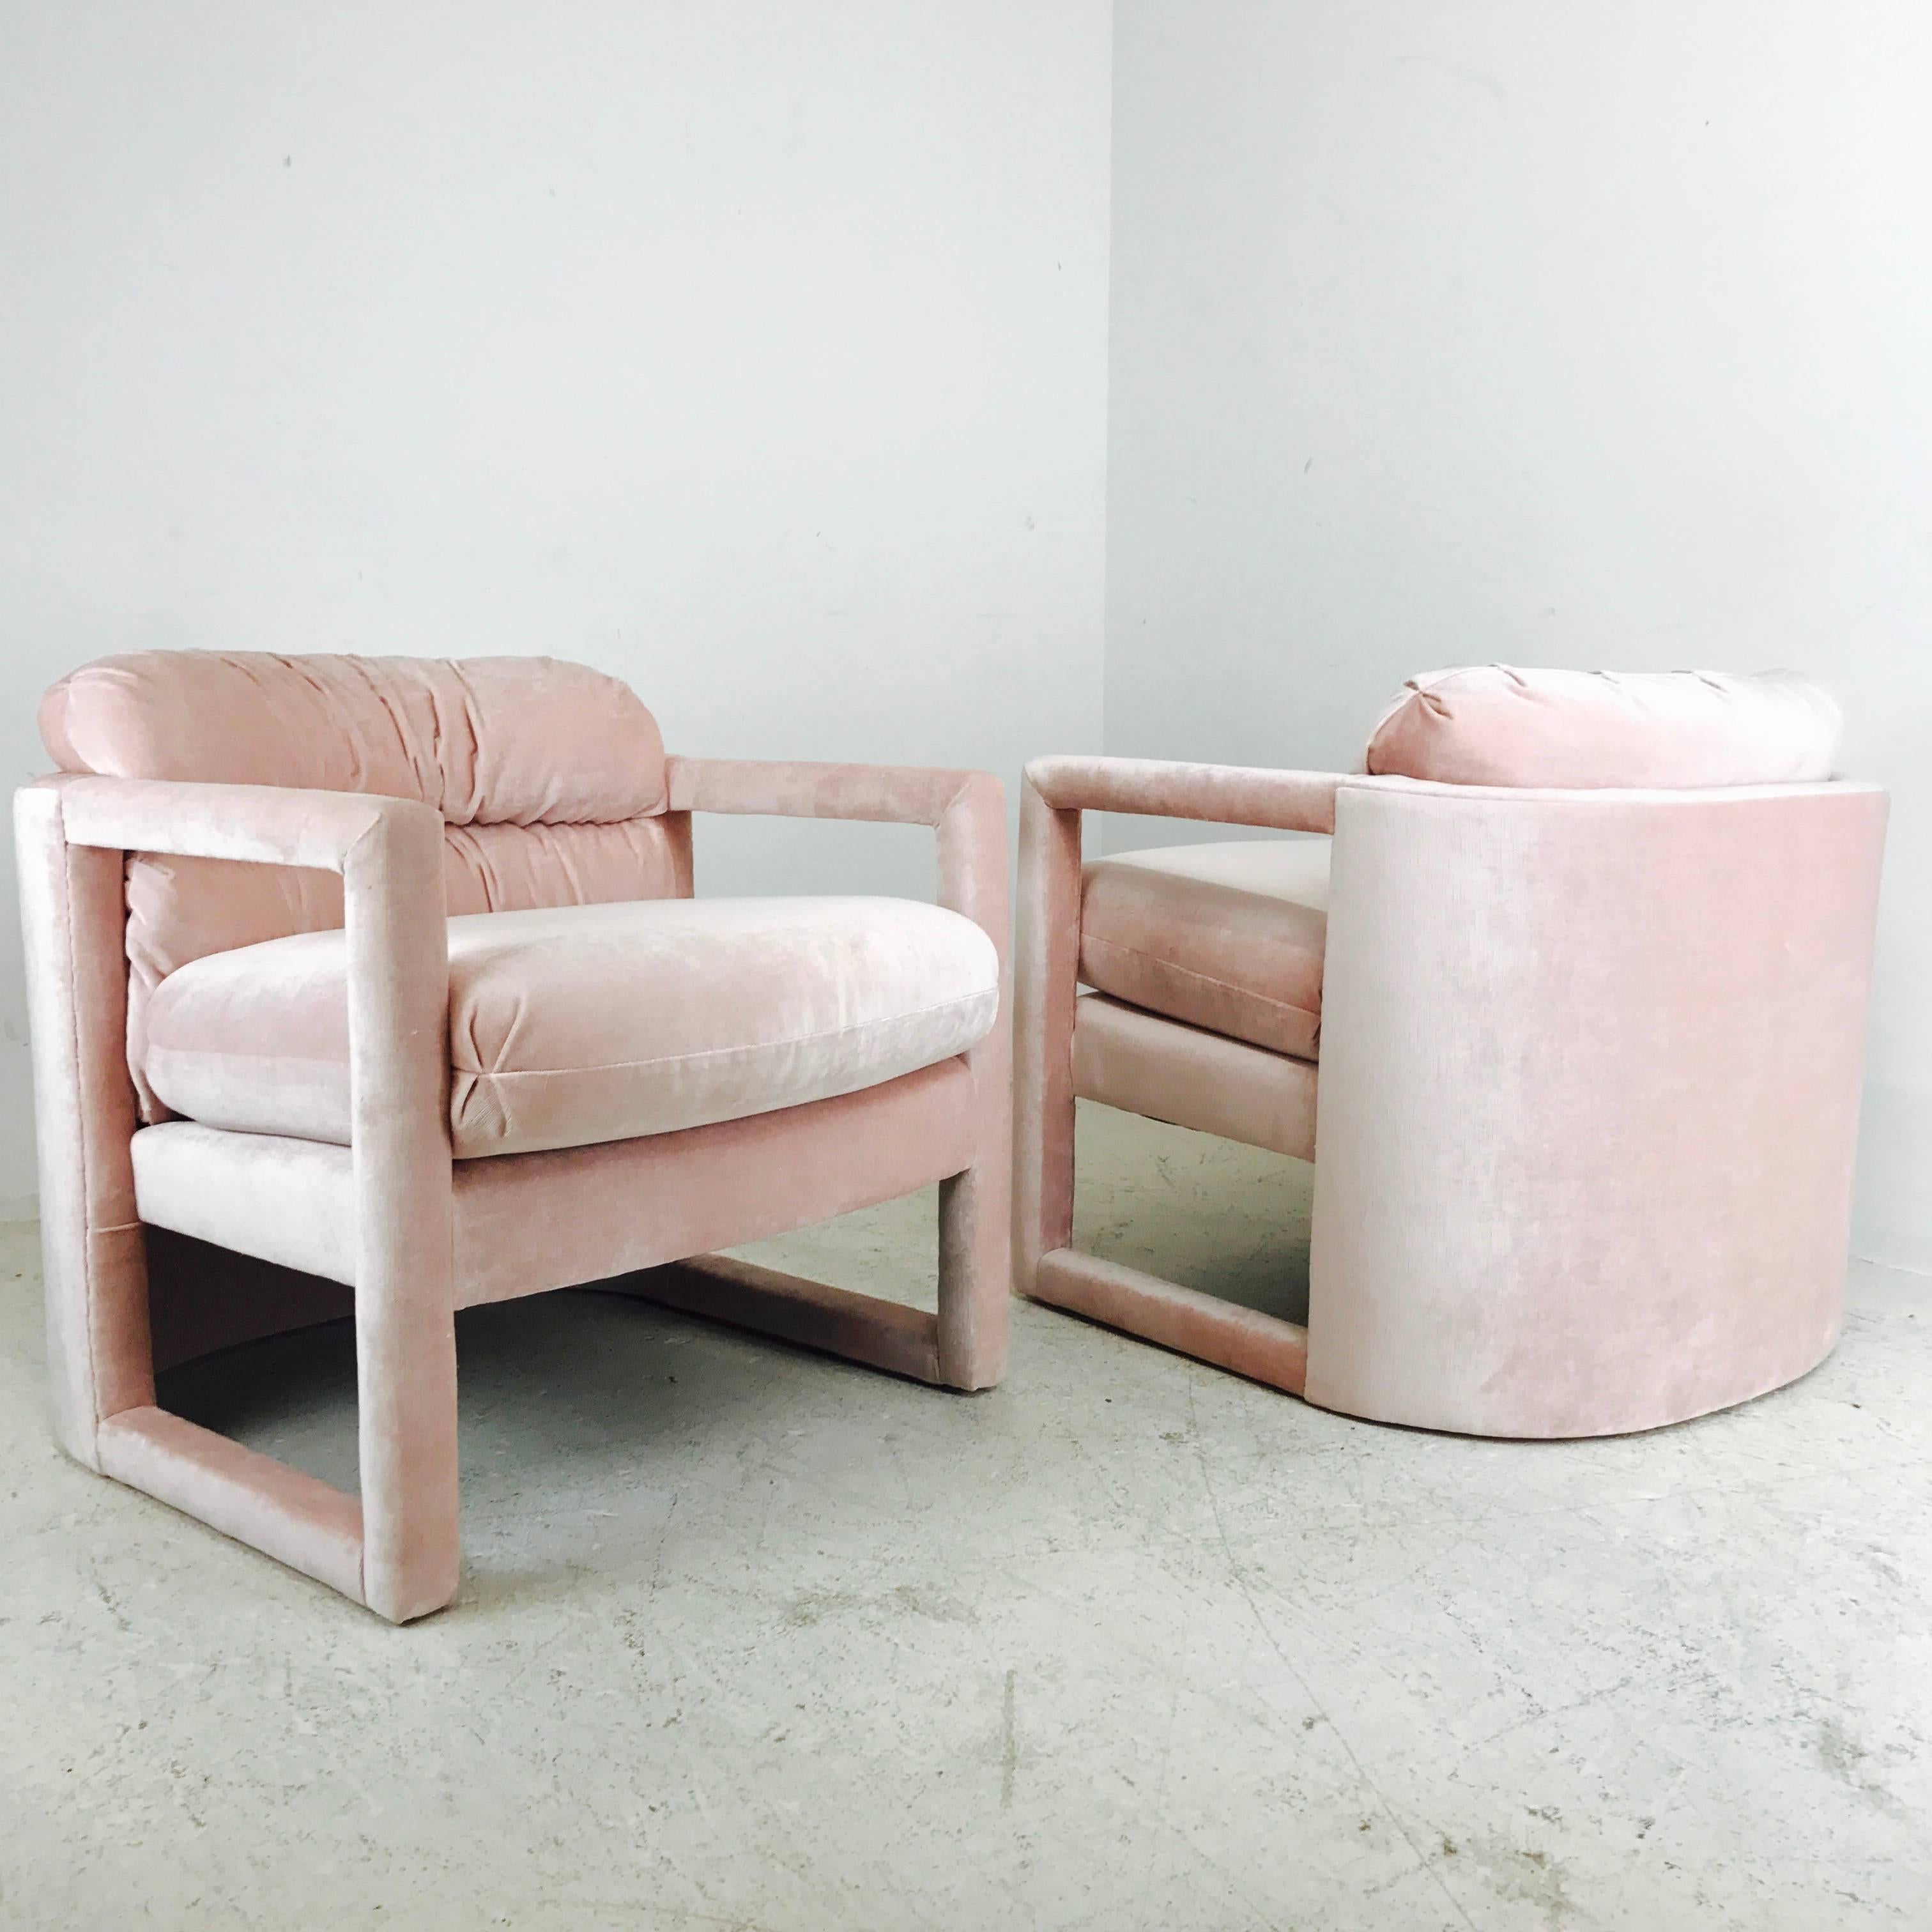 Newly upholstered Drexel Parson style lounge chairs in pink velvet. These chairs are stylish and comfortable. circa 1970s

dimensions: 29"wide 32"deep 29"tall
seat height 20".